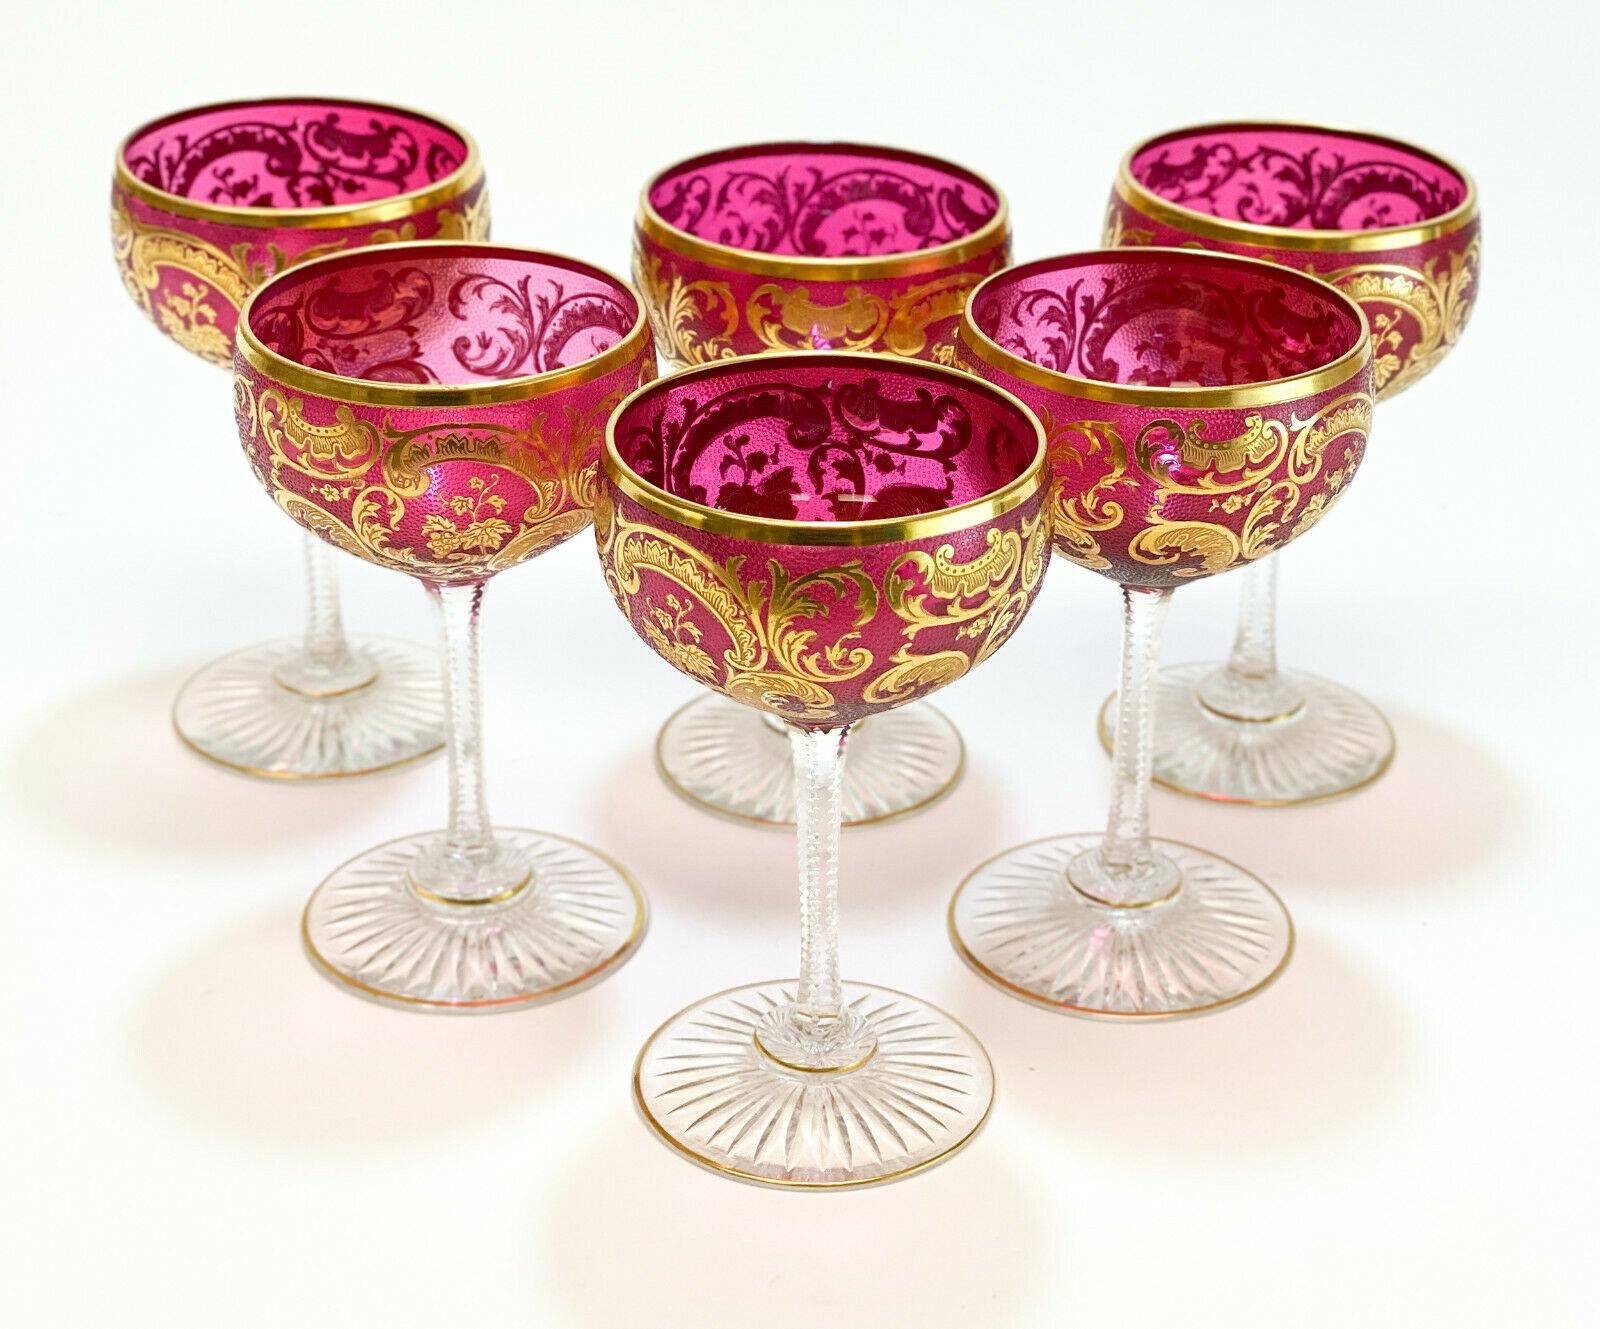 7 exquisite Baccarat cranberry red and gilt wine glass goblets. Gold encrusted foliate scroll designs to the exterior with cut starburst designs to the base. 

Weight approximate, 3 lbs 

Measures approximate, 2.75 inches diameter x 4.5 inches